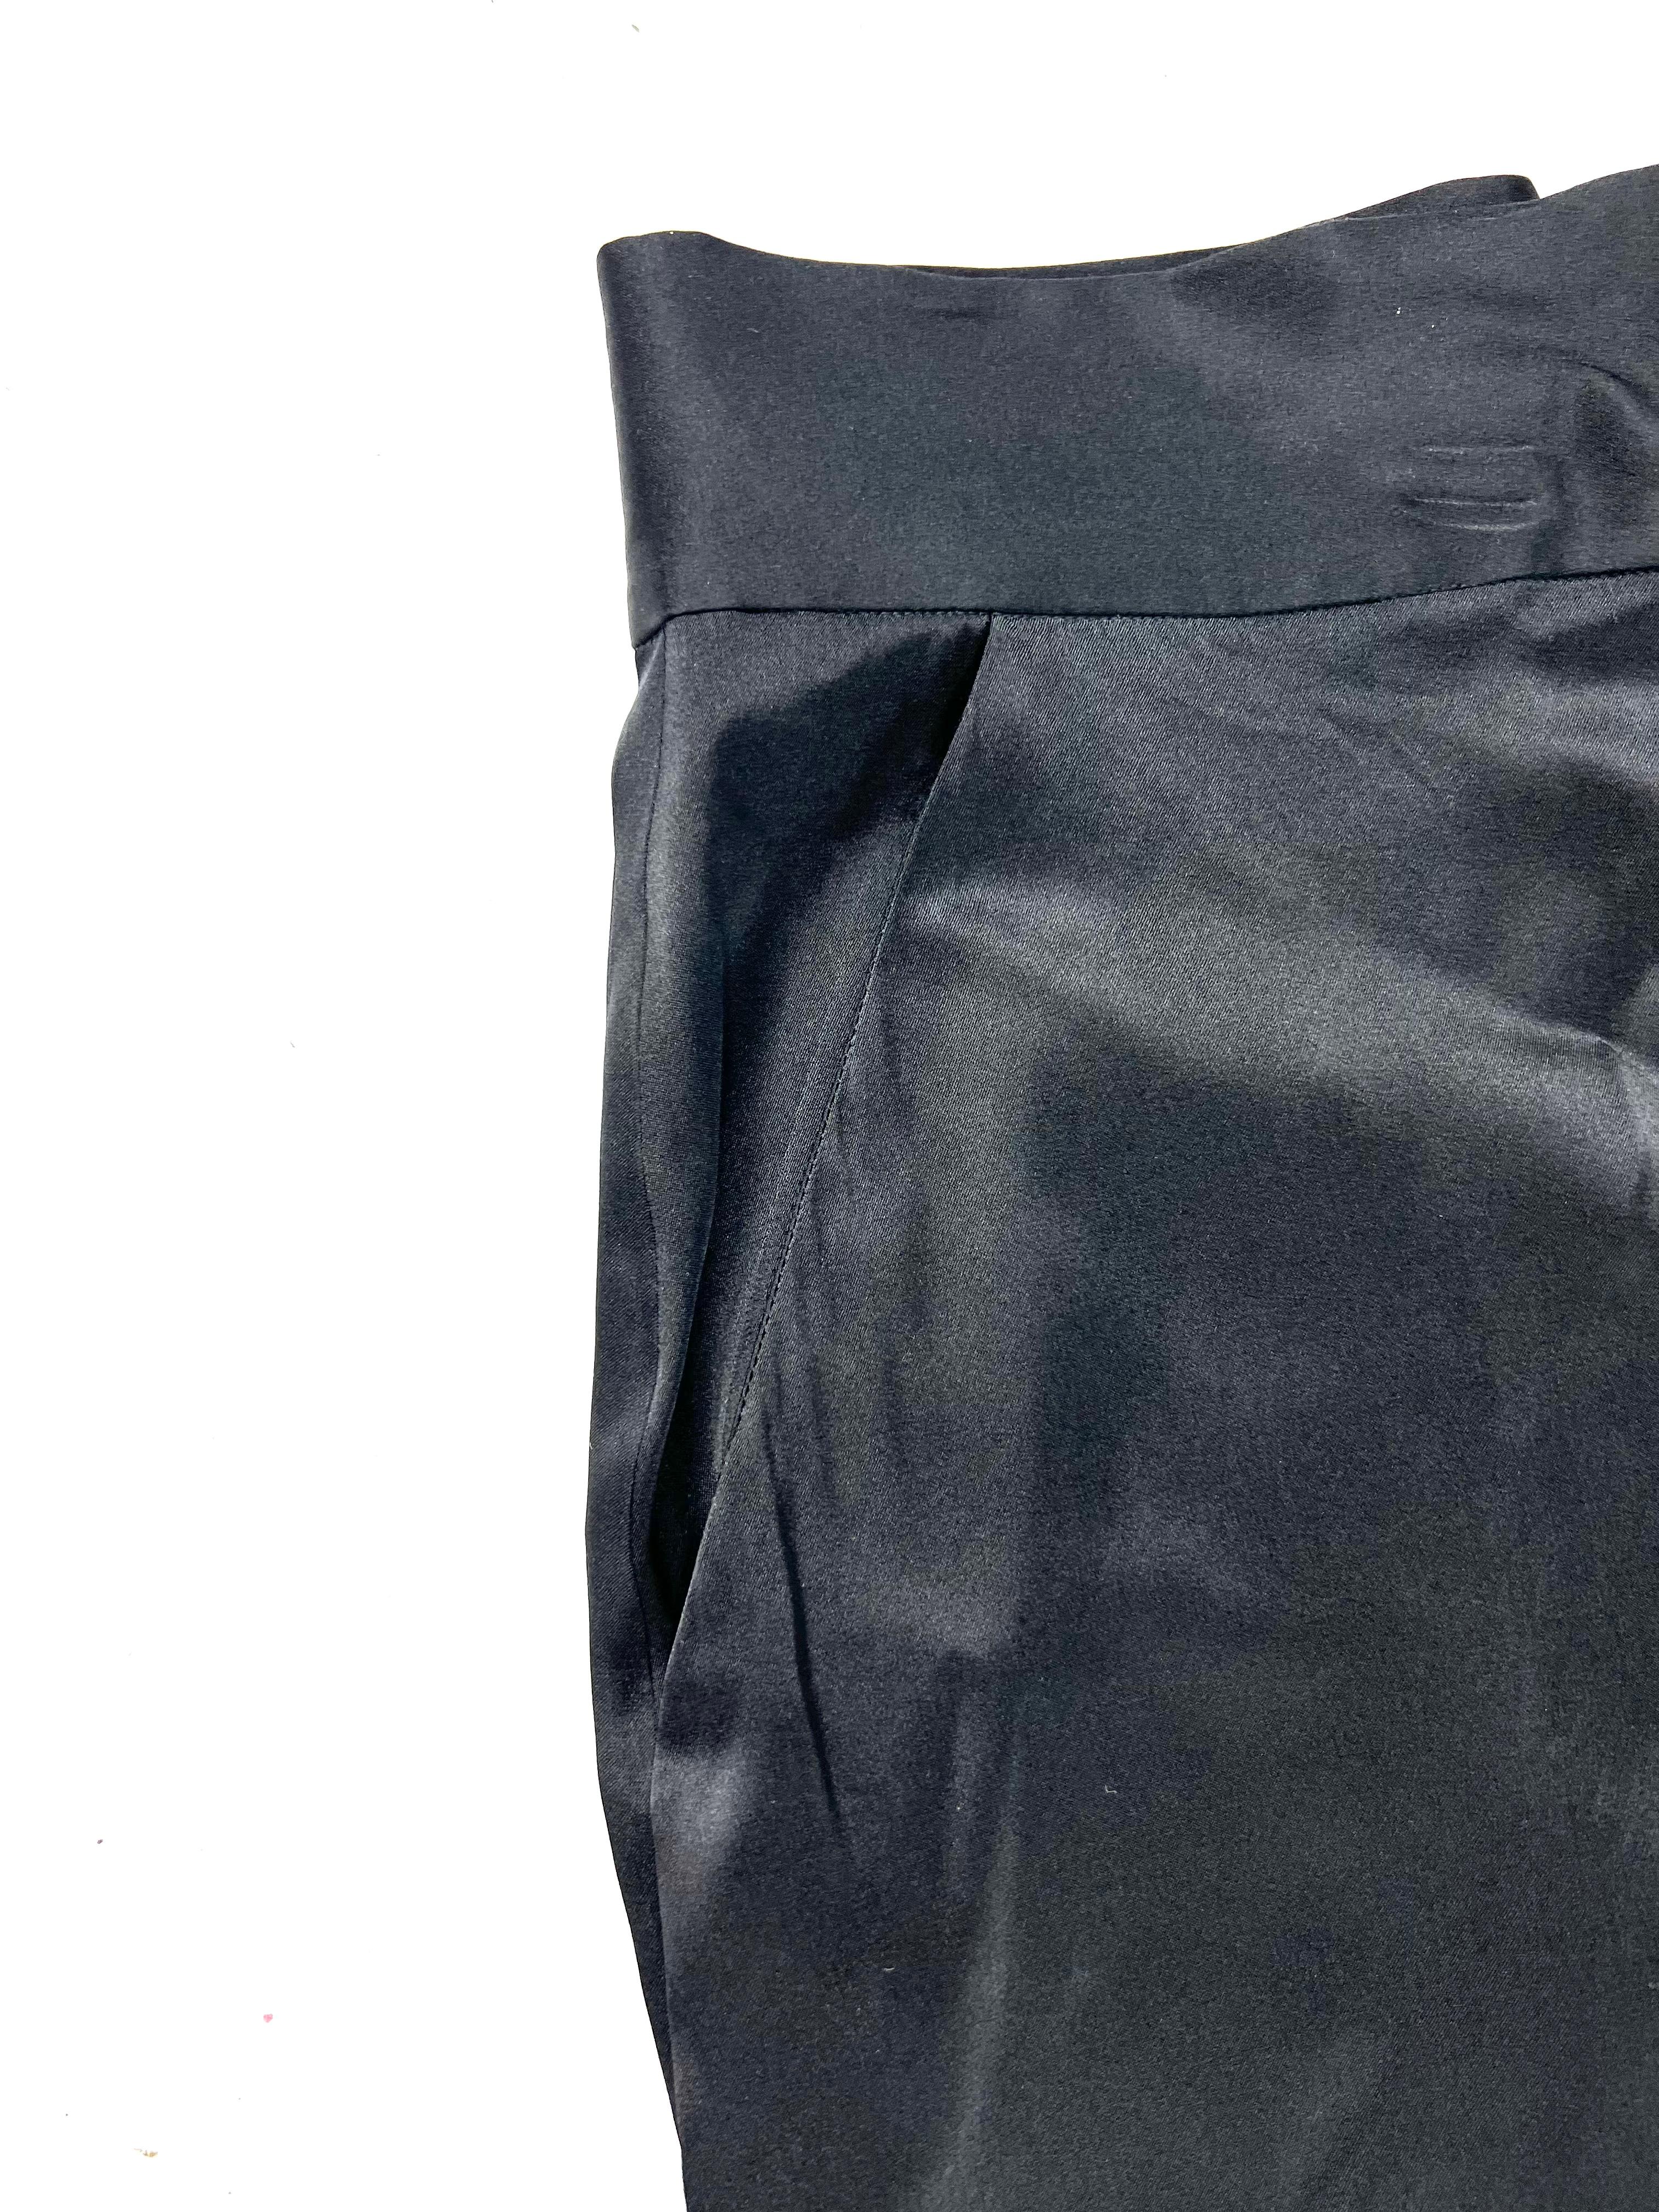 Product details:

The pants feature black satin finish with wide leg style, concealed rear zip closure and side pockets detail. The leg width measure 13” across. 